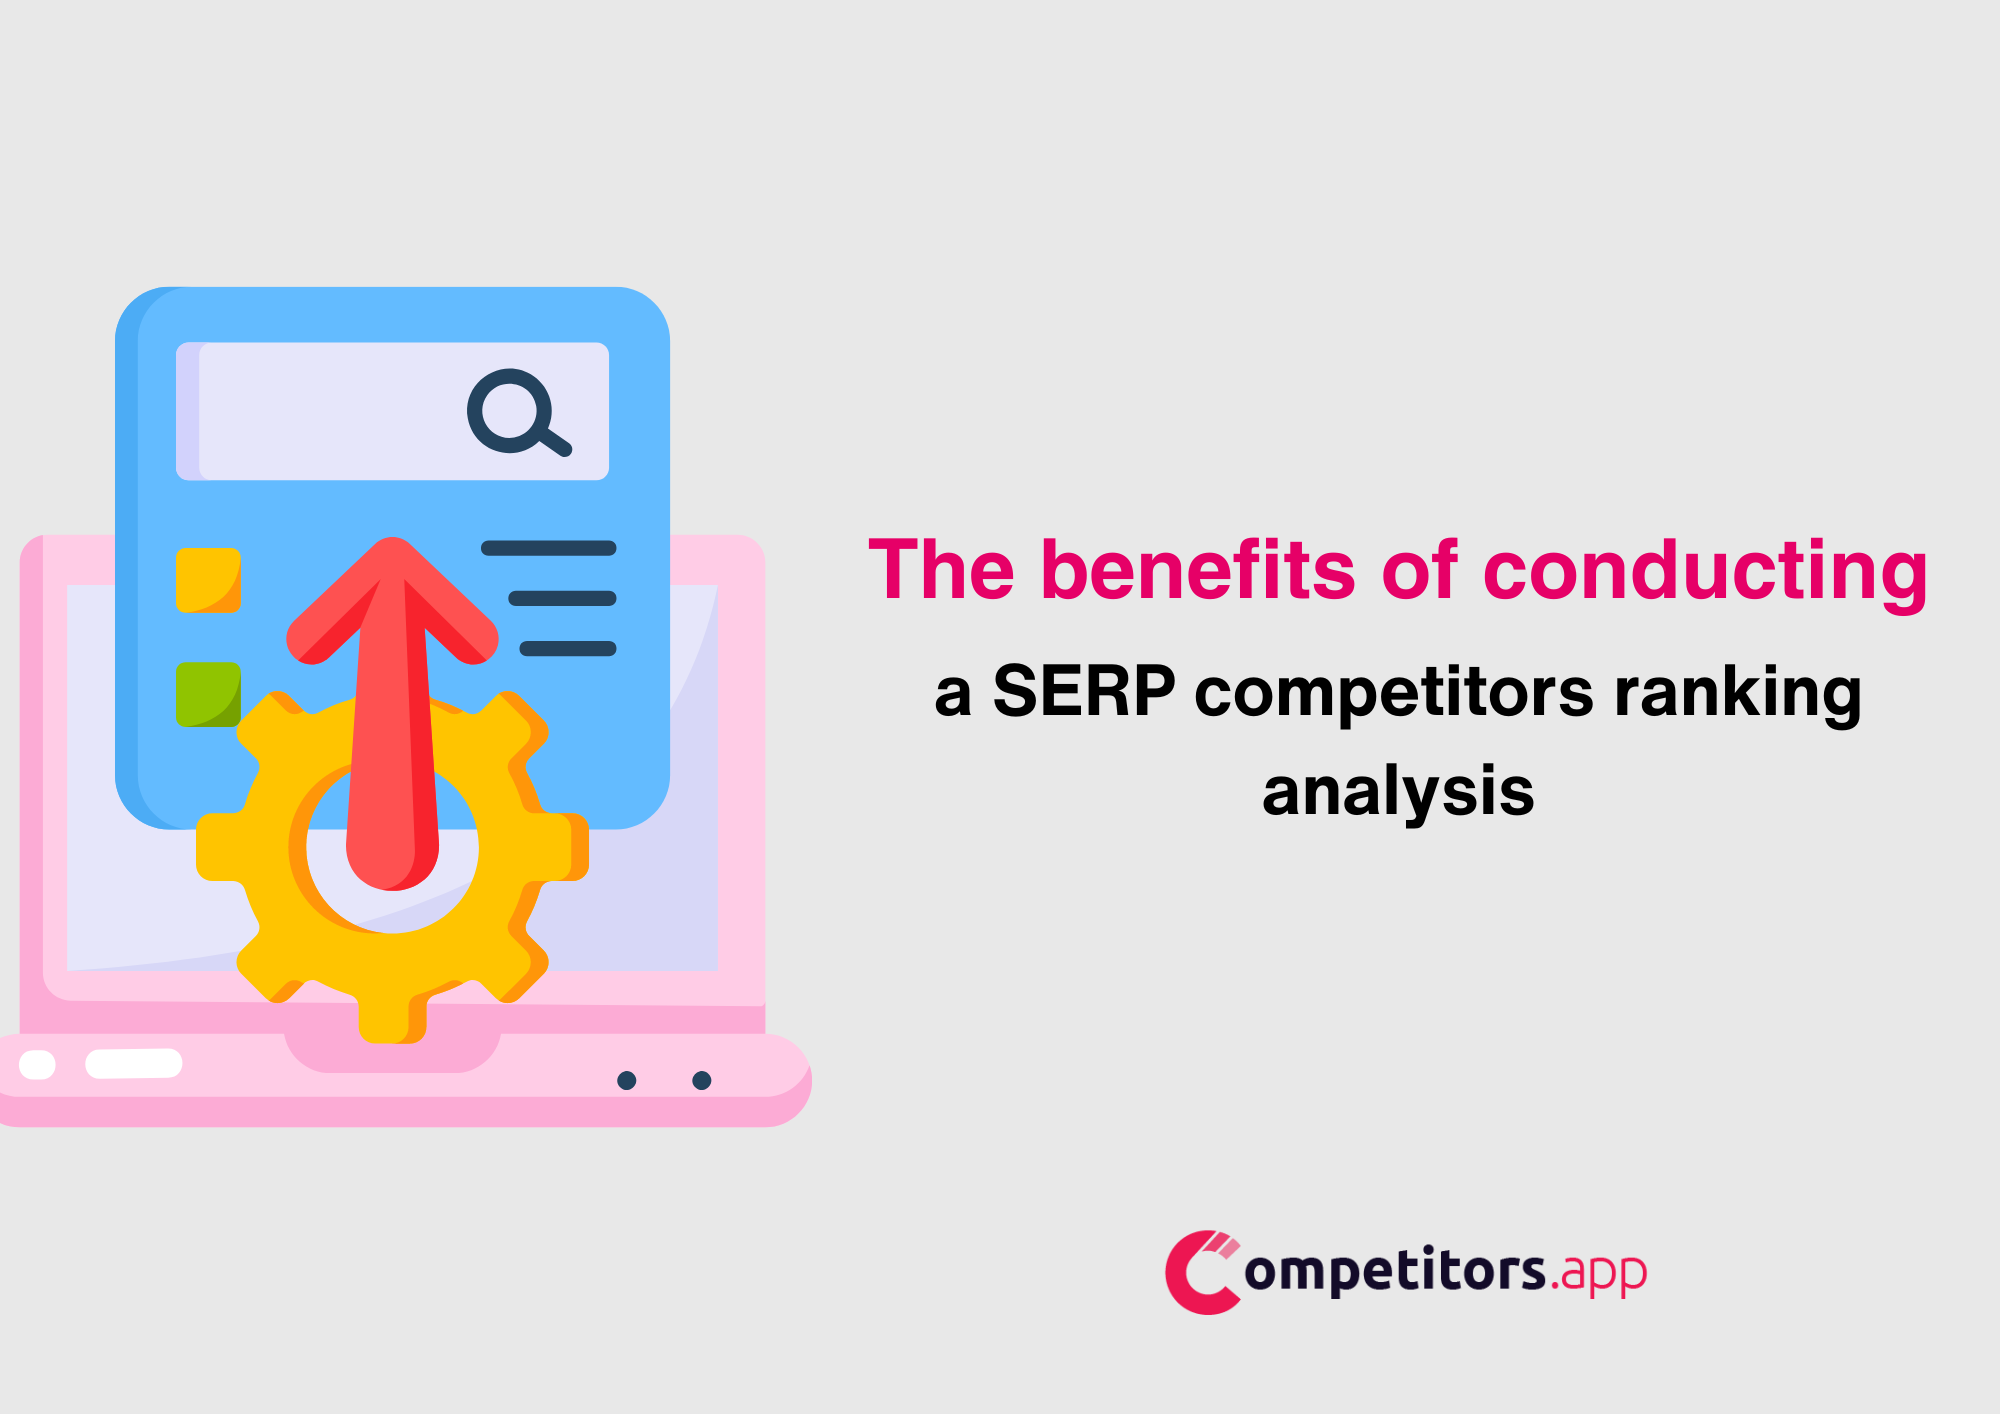 The benefits of conducting a SERP competitors ranking analysis